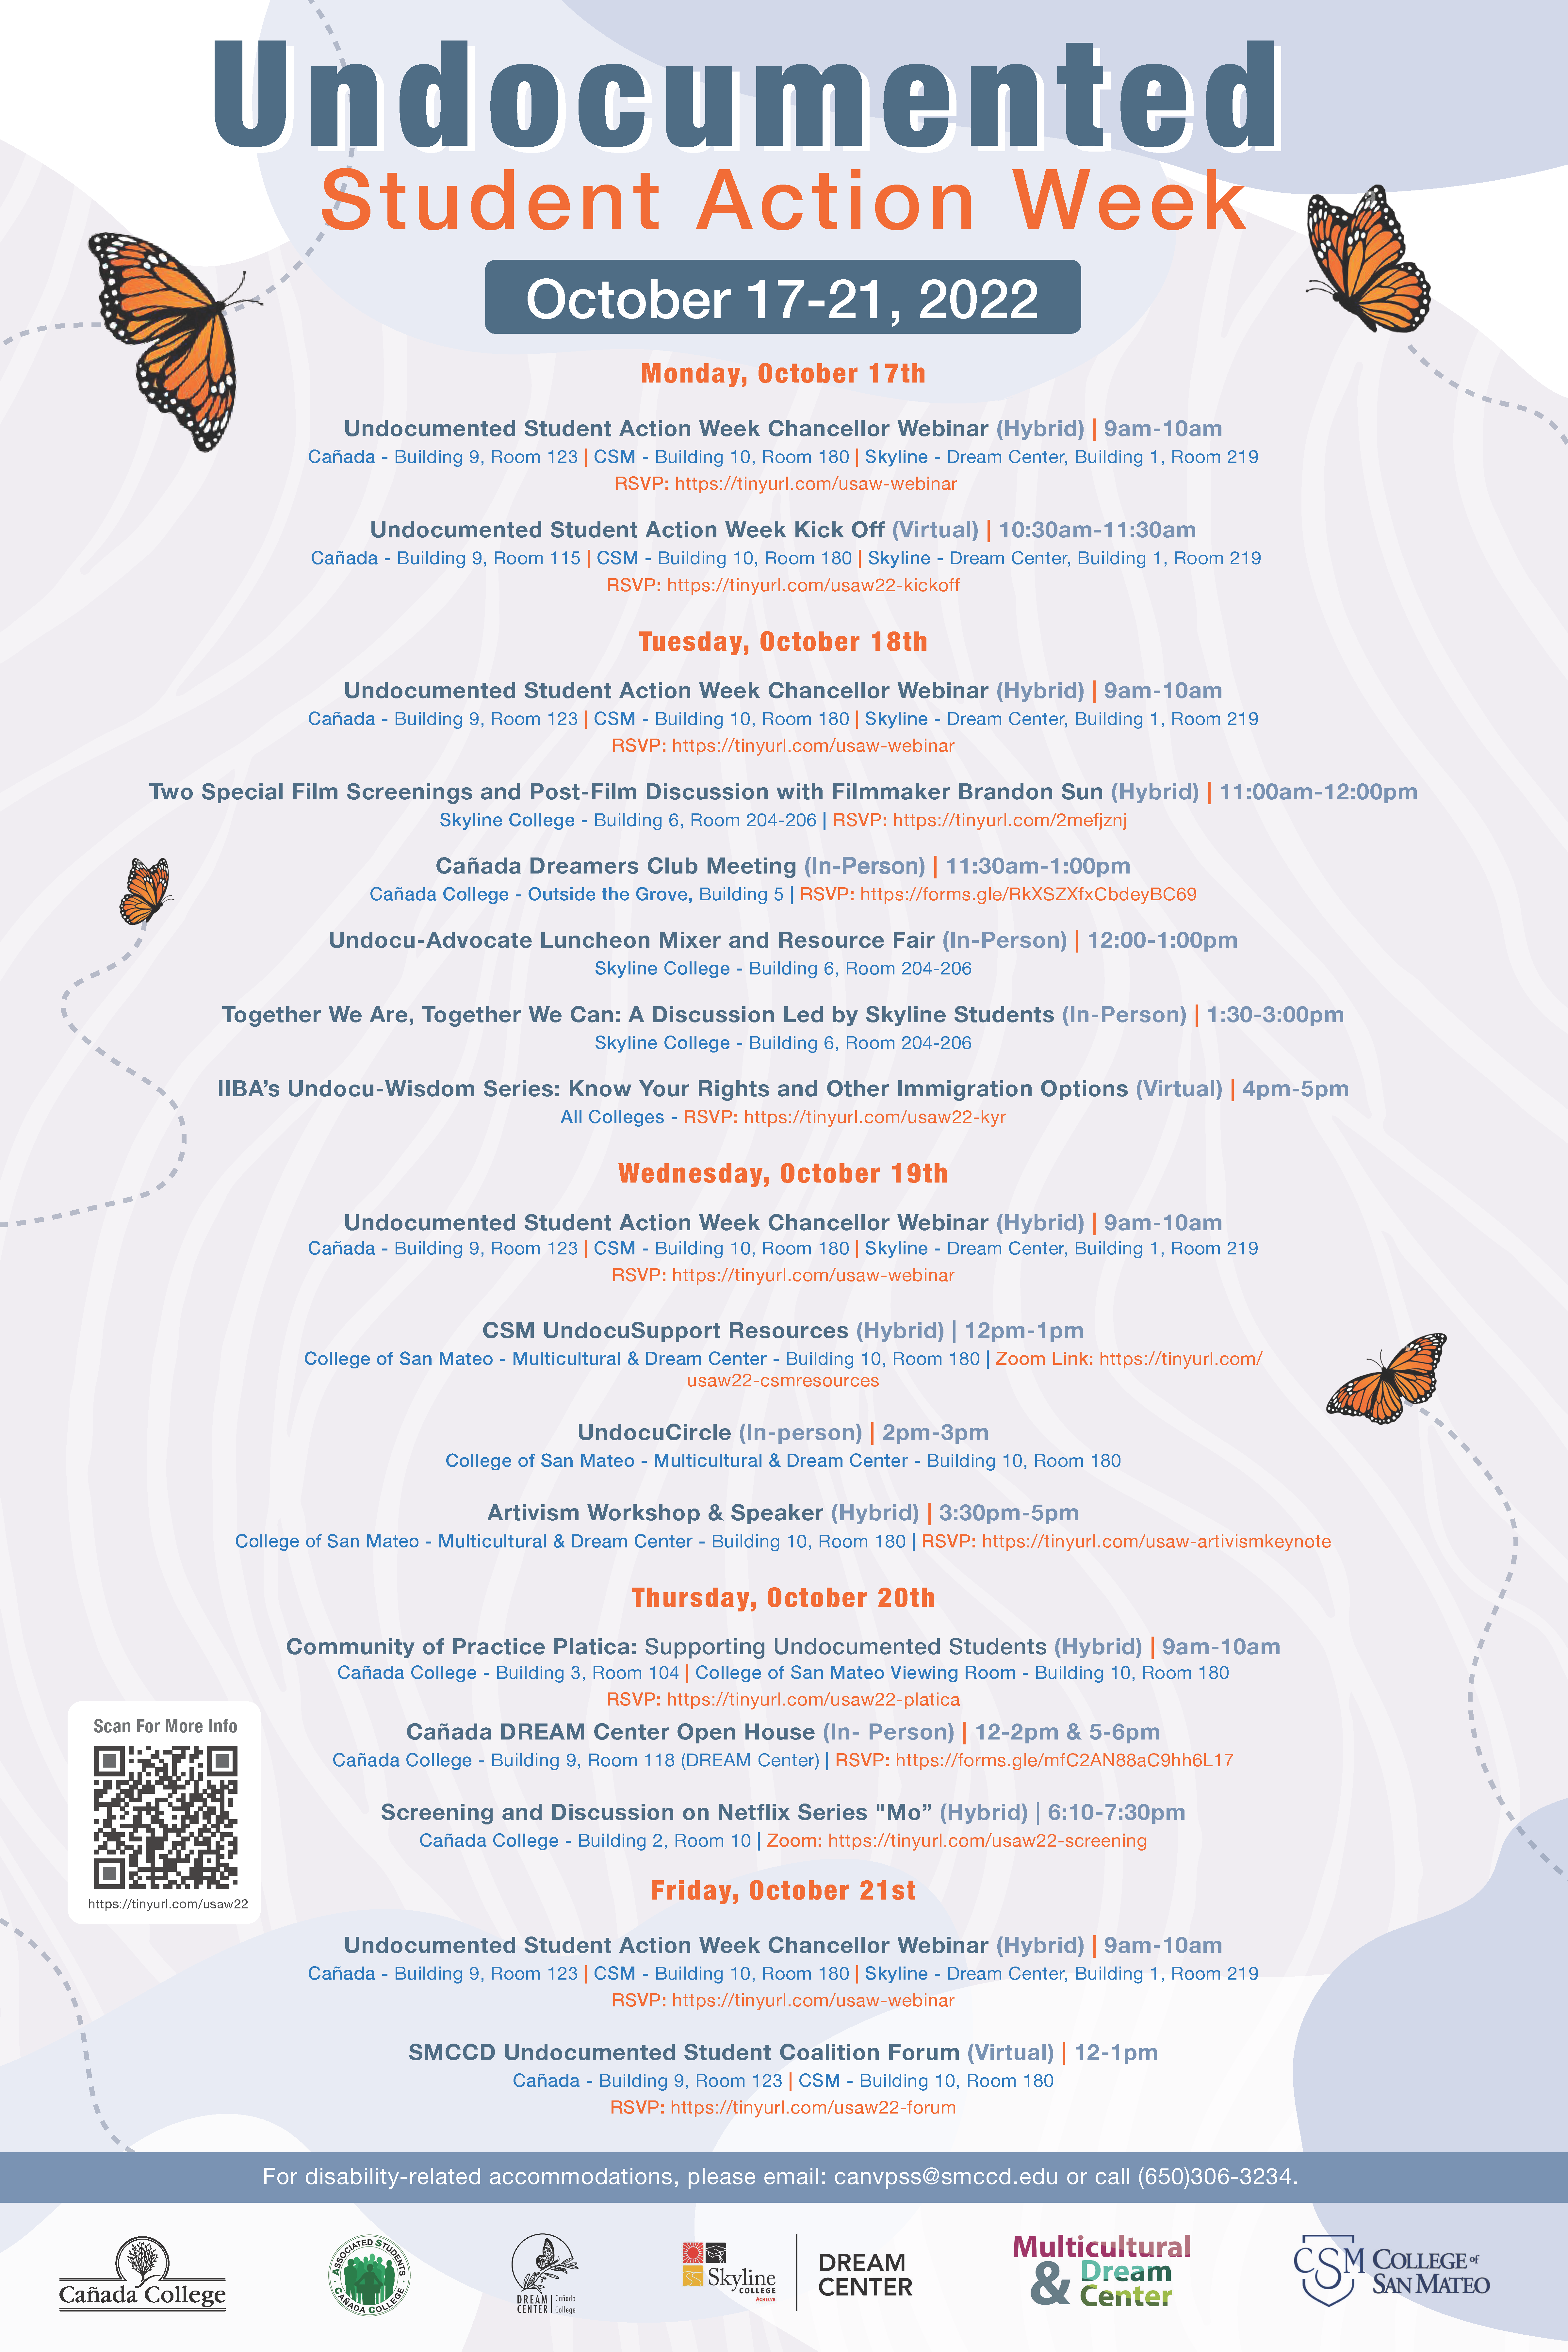 poster with full list of events for undocumented student action week